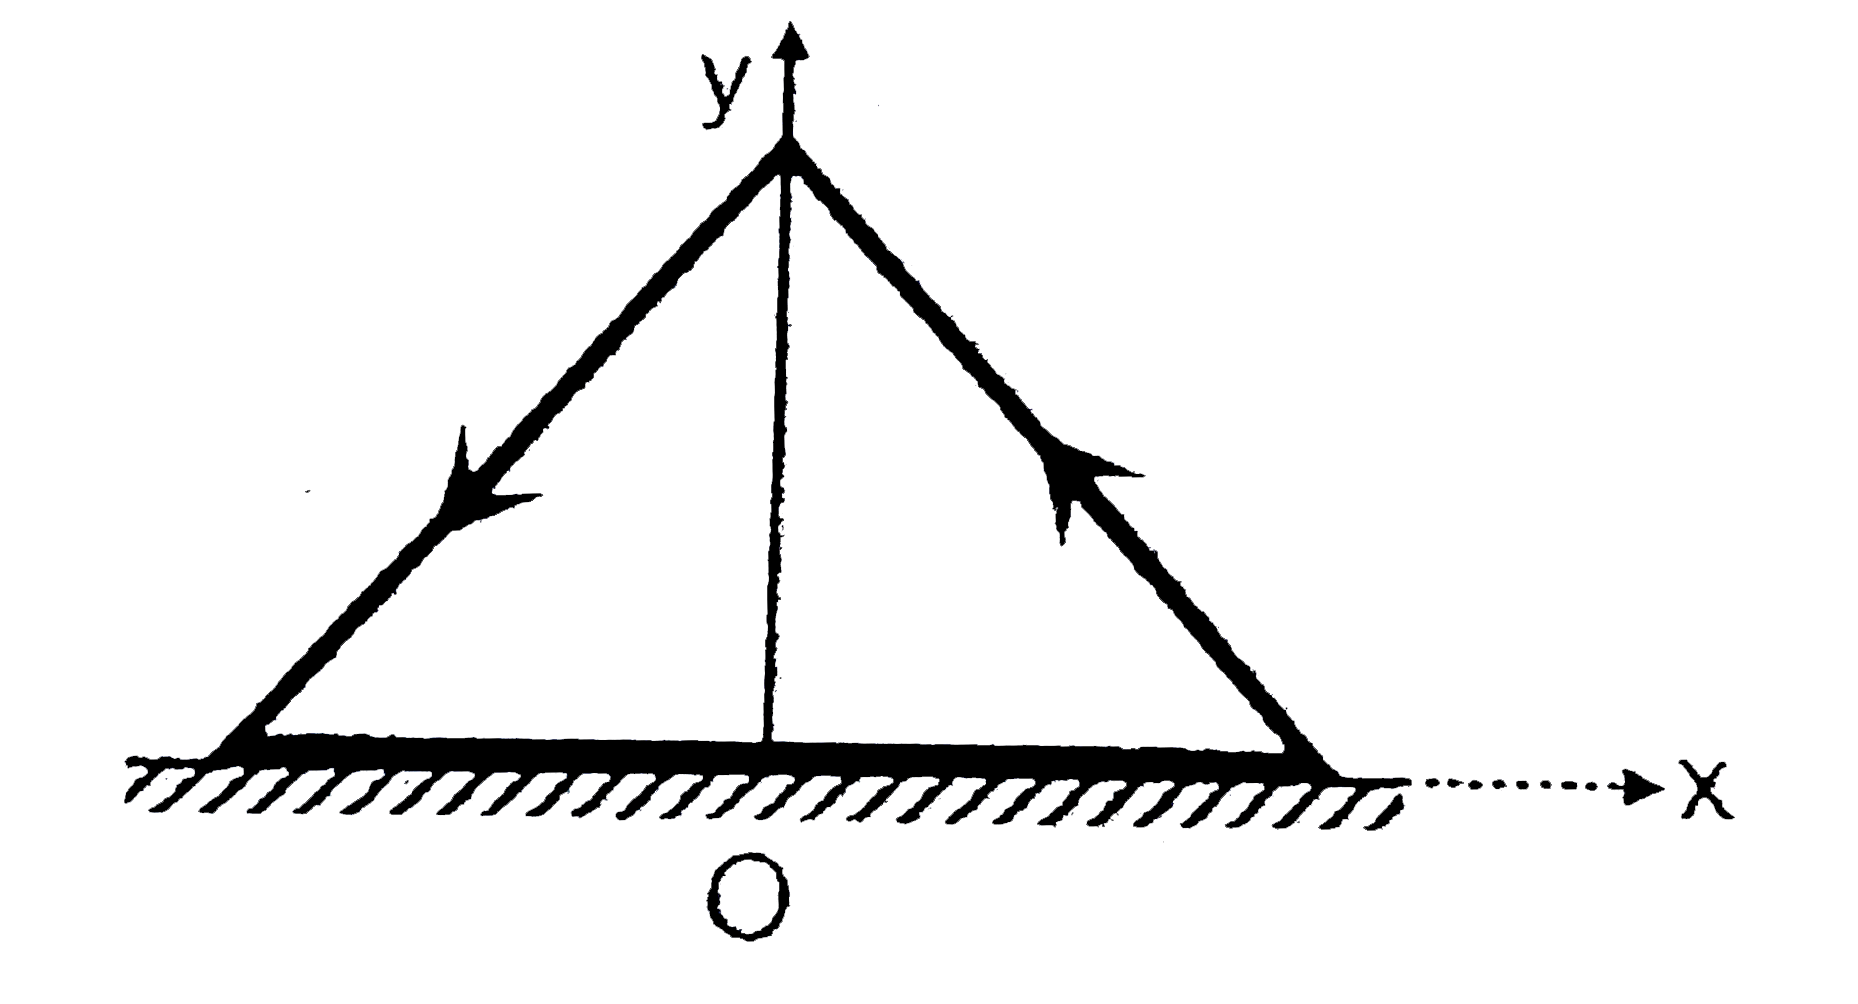 A conducting frame I the shape of an equilateral Delta (mass m, side a) carrying a current l is placed vertically an a horizontal rough surface (coefficient of friction is mu). The frame is free to rotate about y-axis only. A magnetic field exists such that vecB=-B(0)yhati. Then